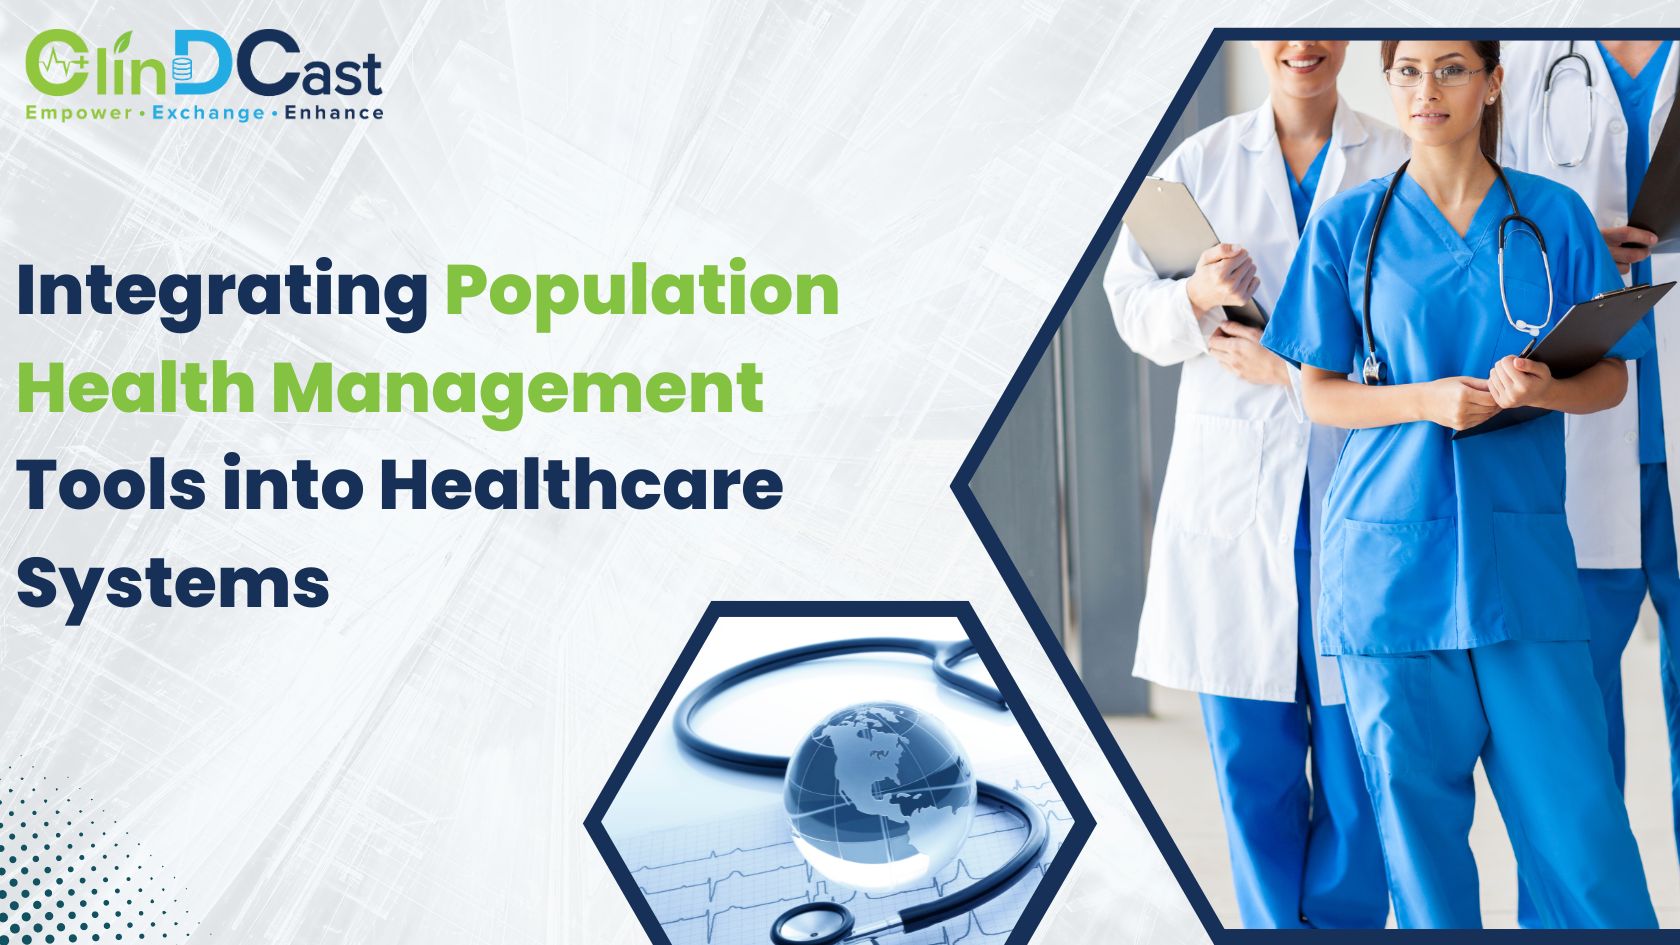 Integrating Population Health Management Tools into Healthcare Systems